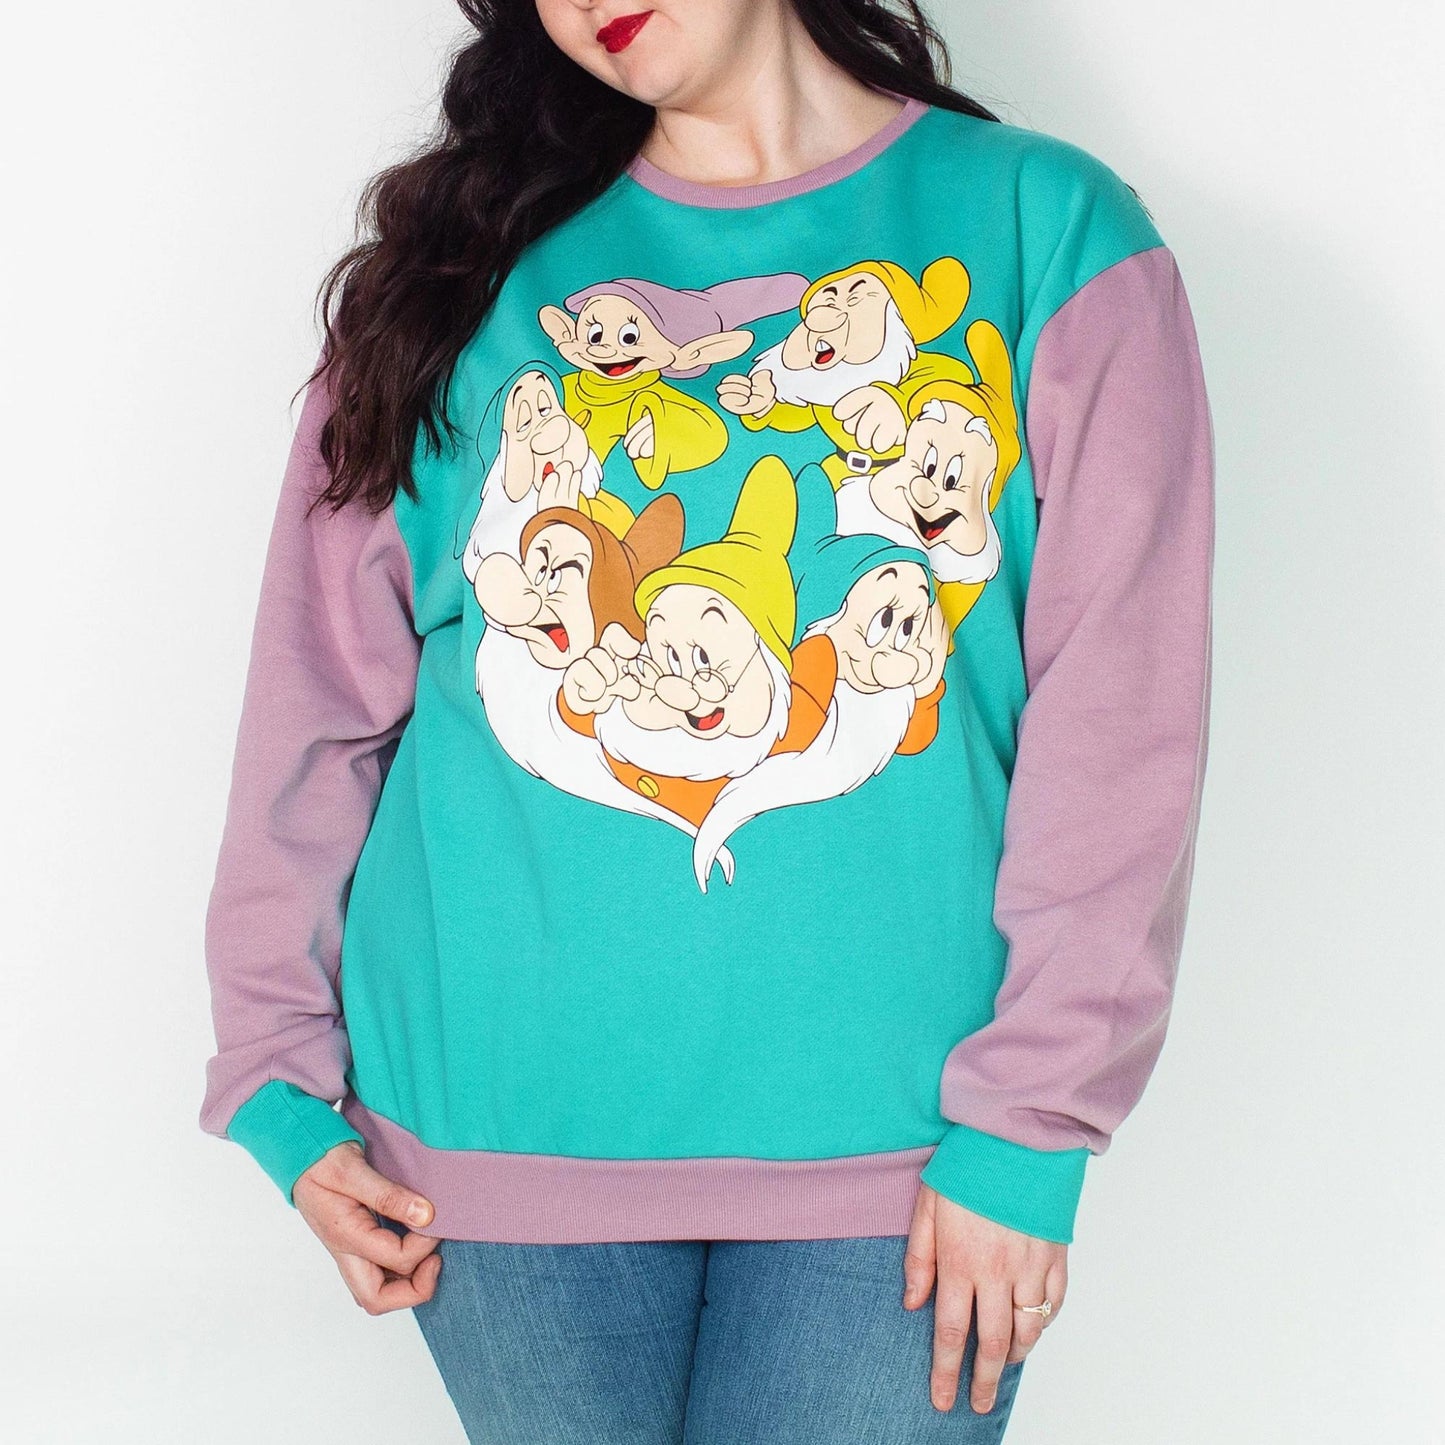 Snow White and the Seven Dwarfs (Disney) Crew Neck Sweater by Cakeworthy